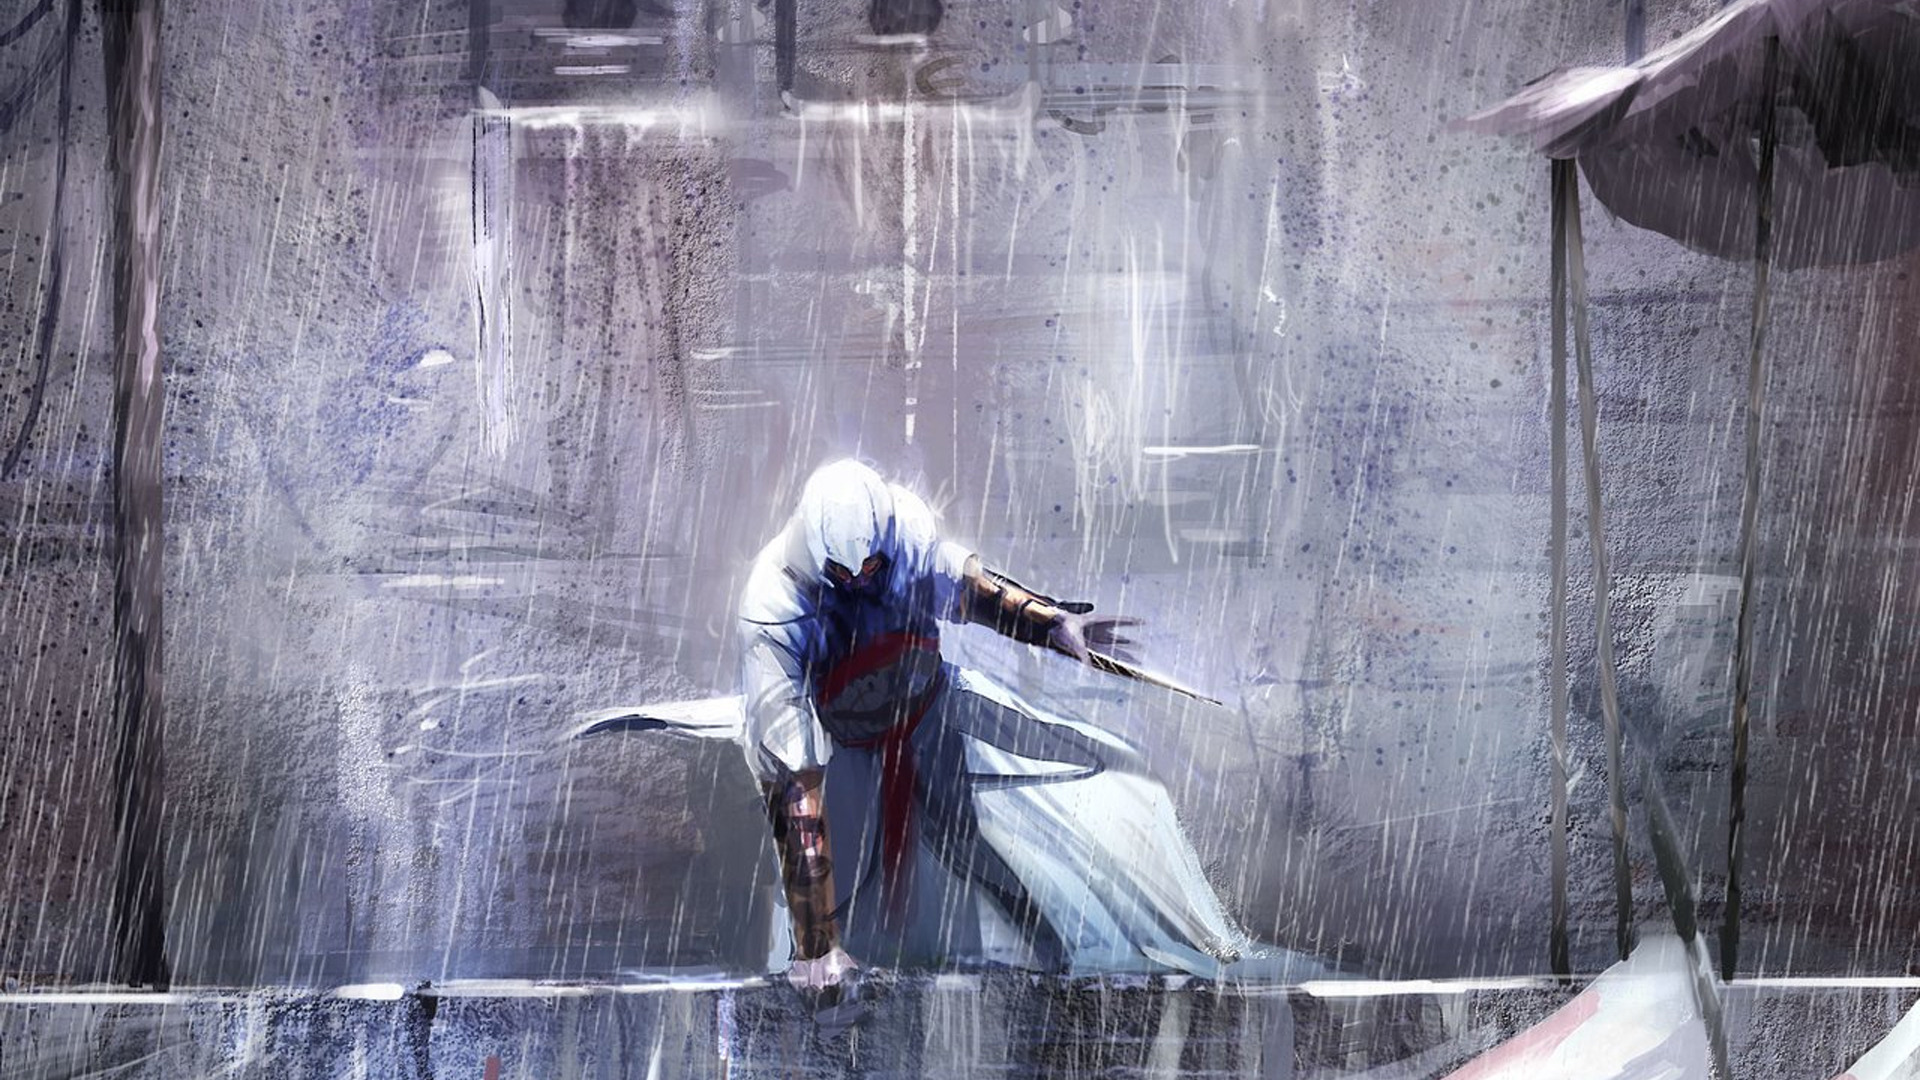 Video Game Assassins Creed 1920x1080